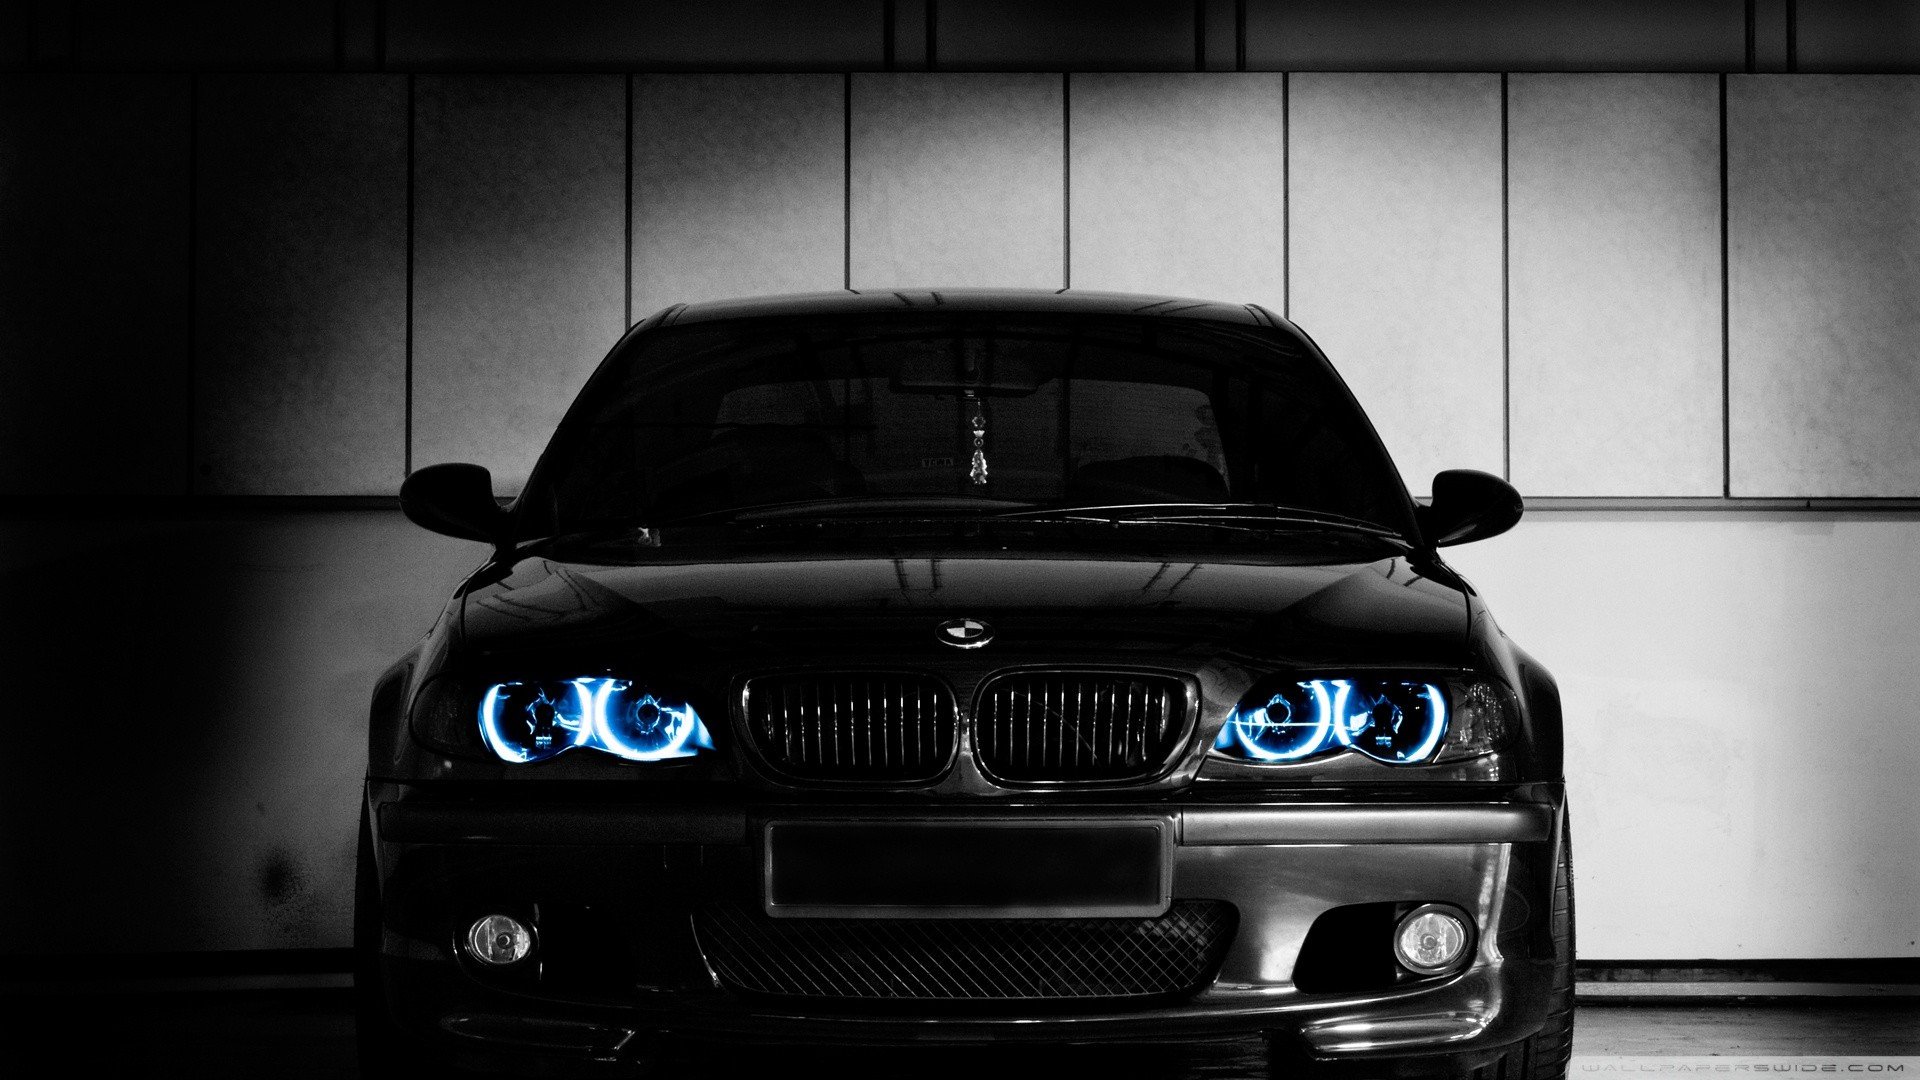 Free Download Download Bmw E46 M3 Wallpaper 1920x1080 For Your Desktop Mobile Tablet Explore 46 Bmw M3 Iphone Wallpaper Bmw E46 Wallpaper Bmw E30 Wallpaper Bmw Wallpaper 1920x1080